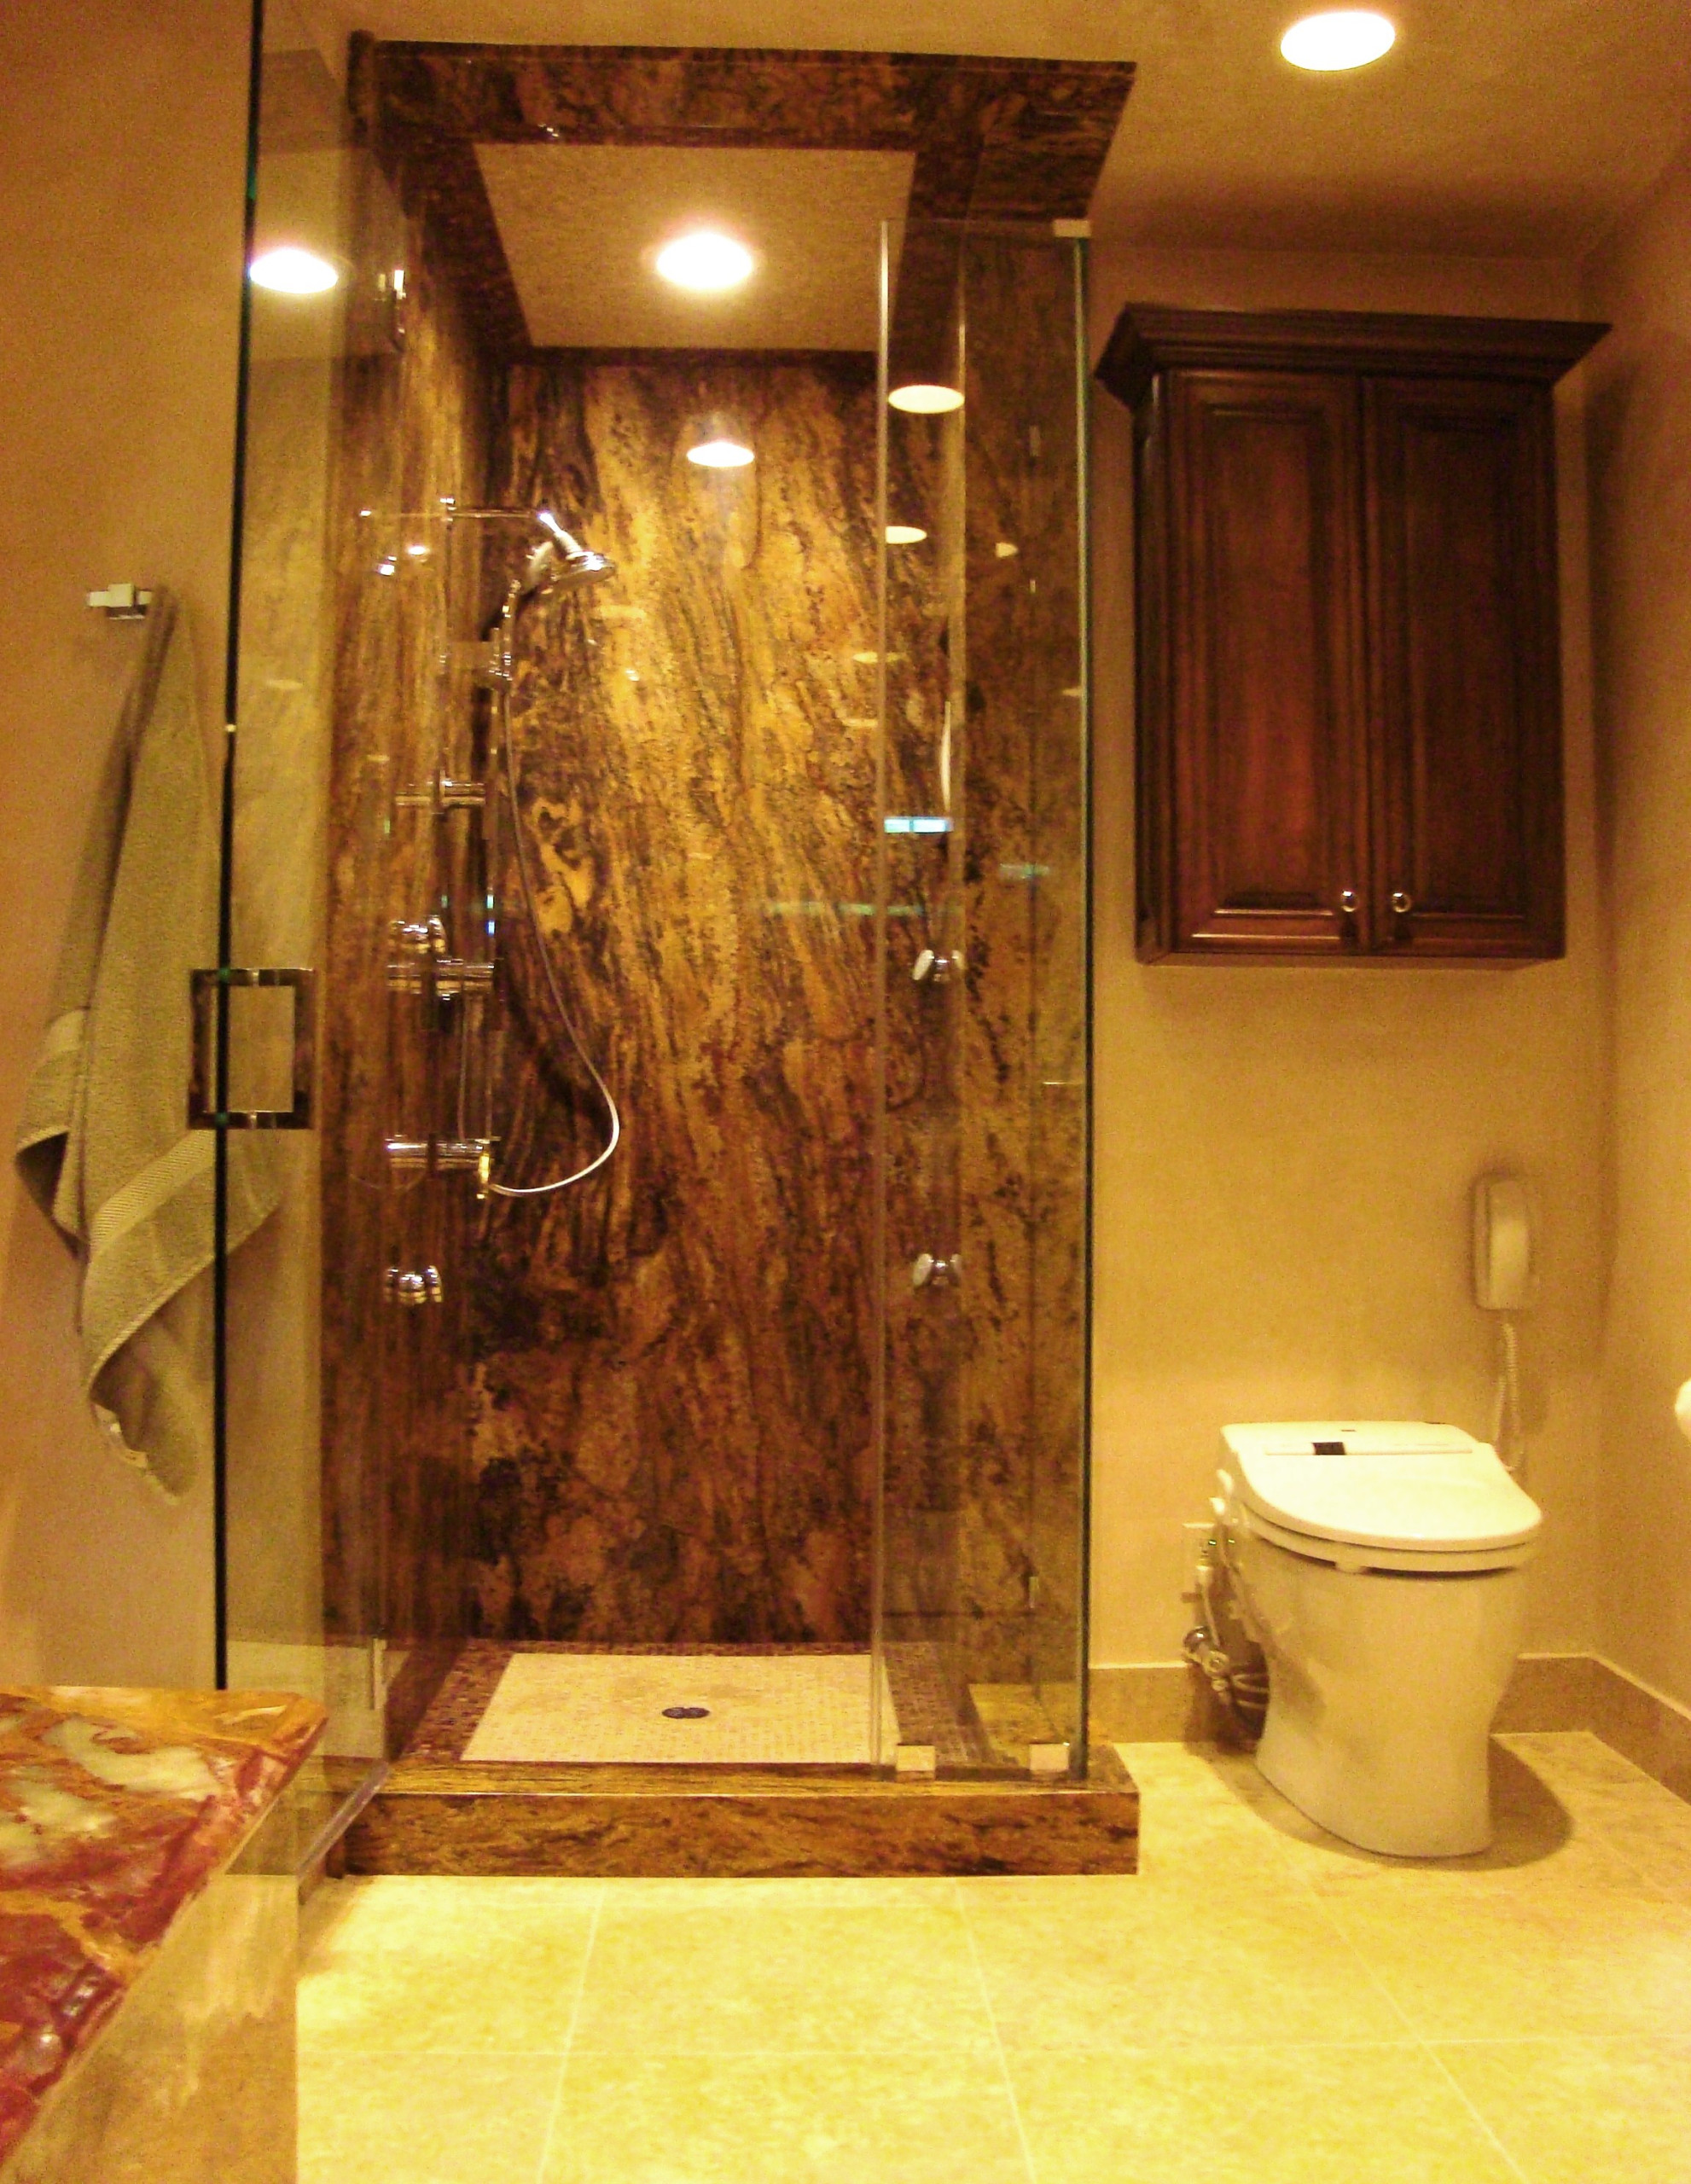 The Rubin-Spa shower with body sprays and the $5200.00 TOTO toilet